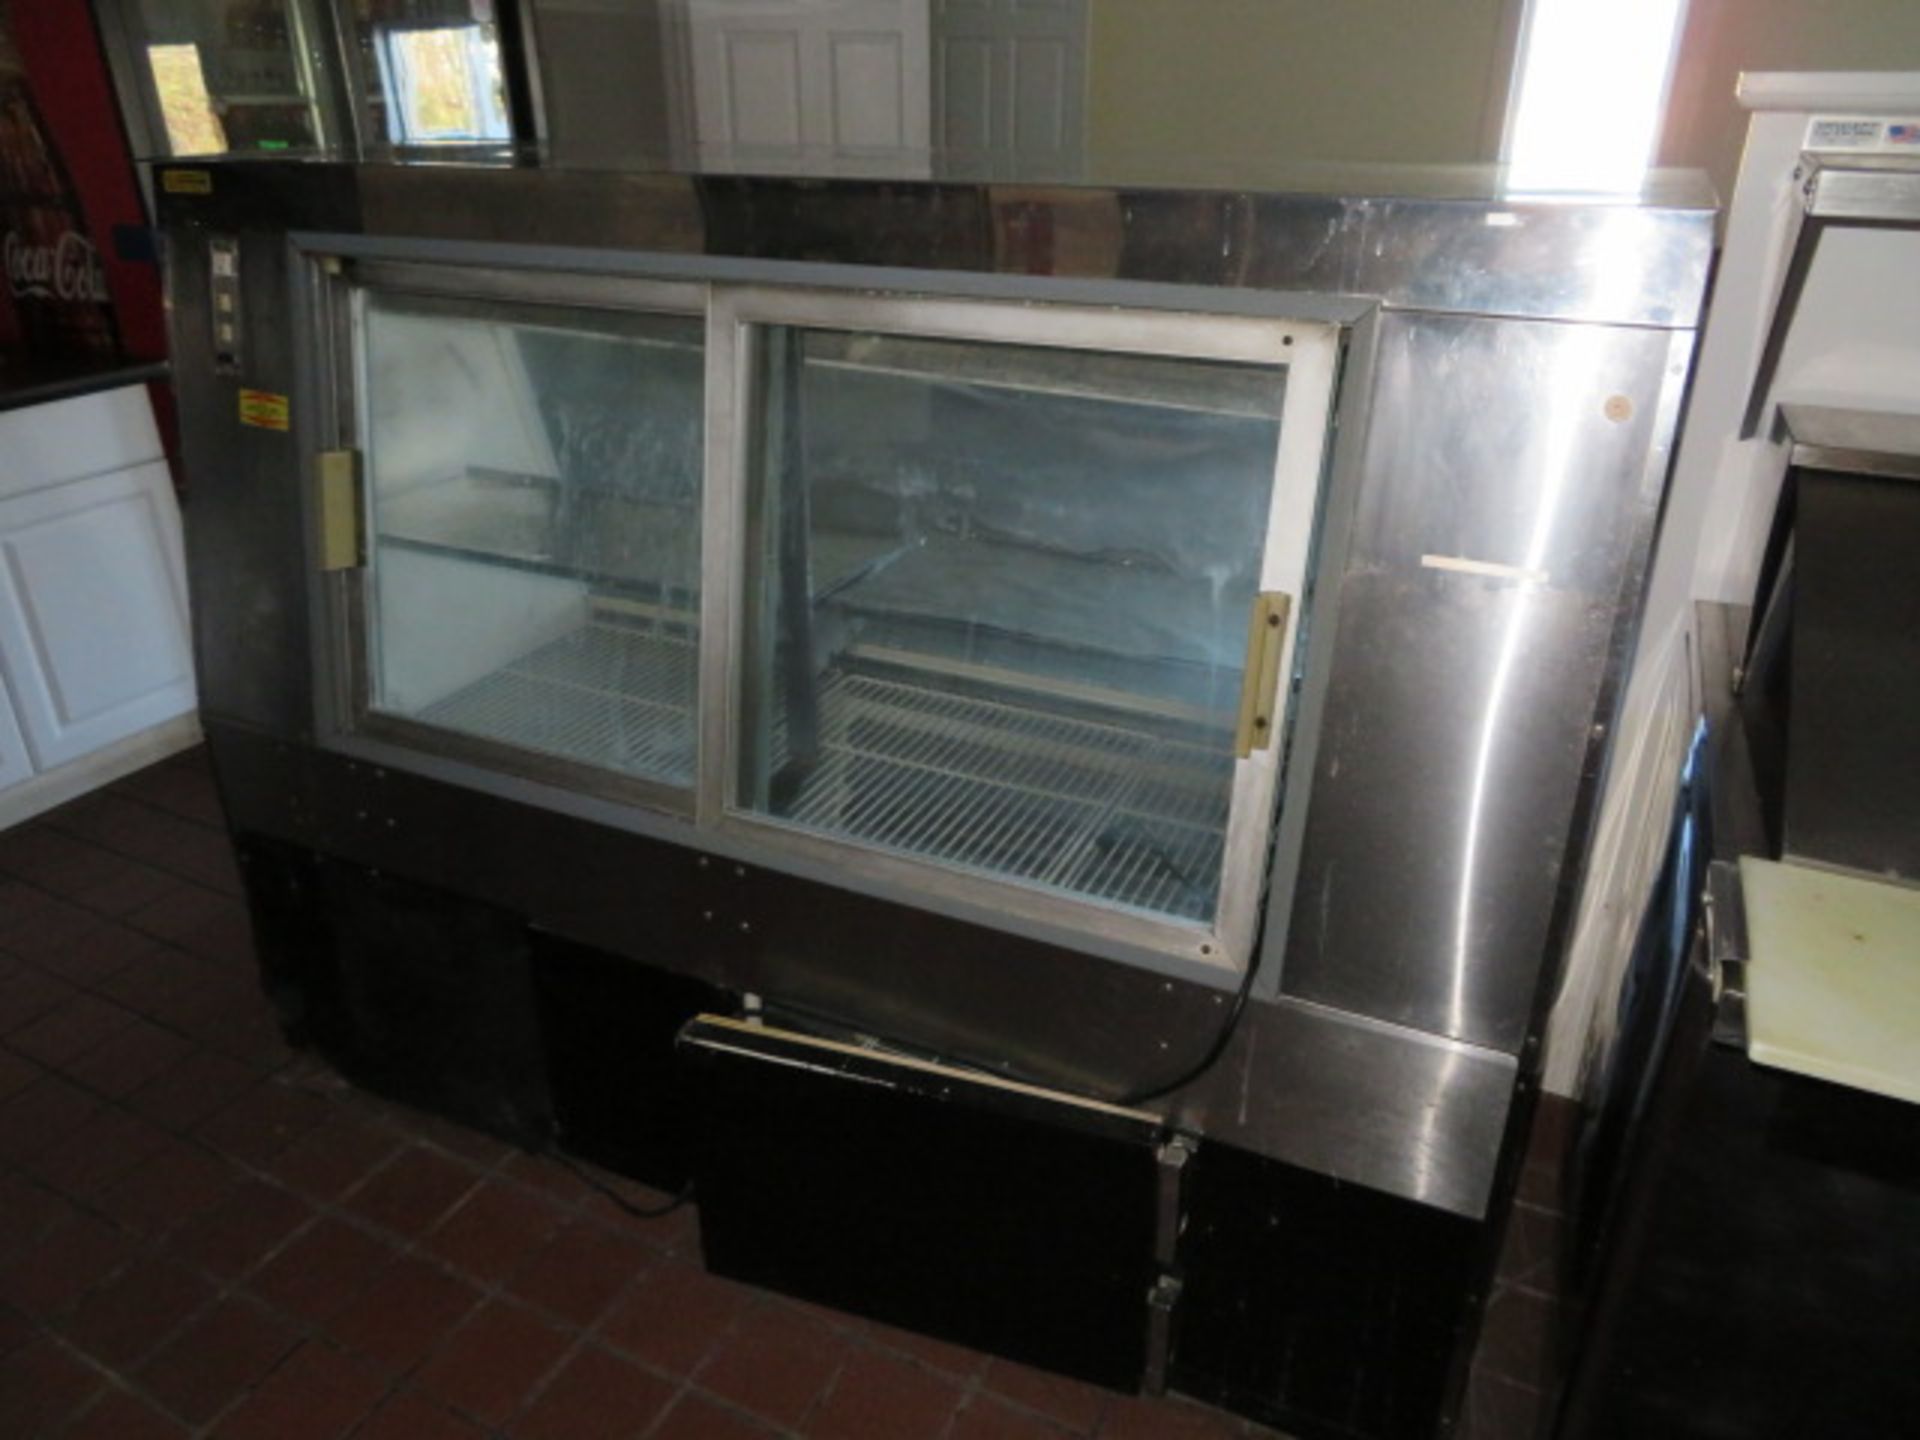 BEVERAGE-AIR 5' S/C FLAT GLASS DELI CASE (Located - Mays Landing, NJ) - Image 2 of 4